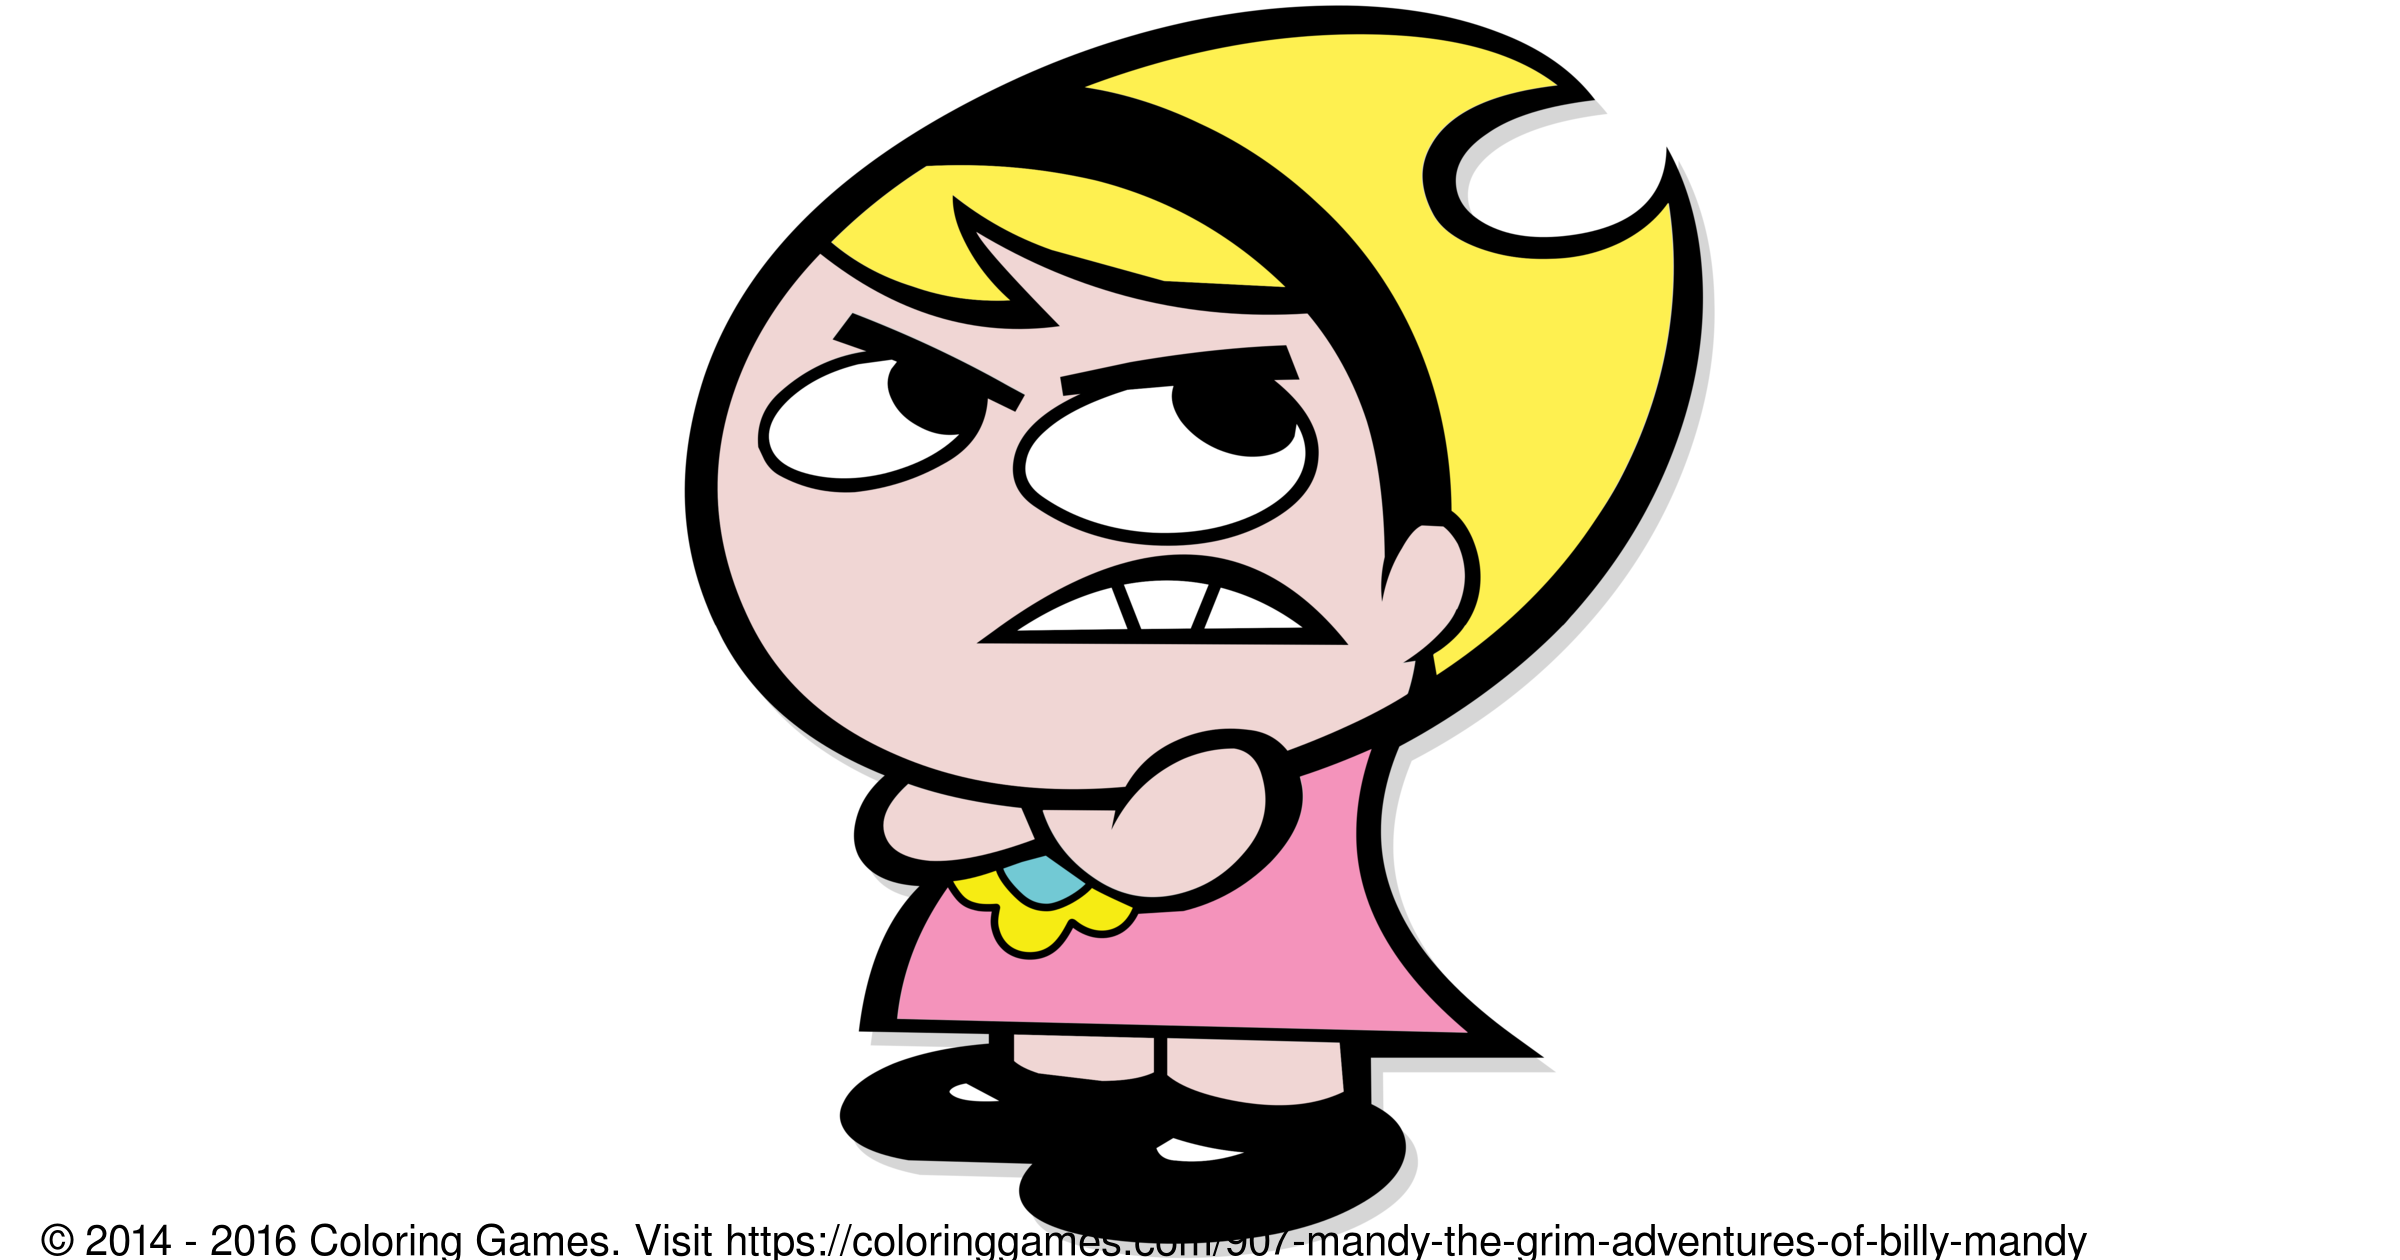 Mandy (The Grim Adventures of Billy & Mandy) - Coloring Game